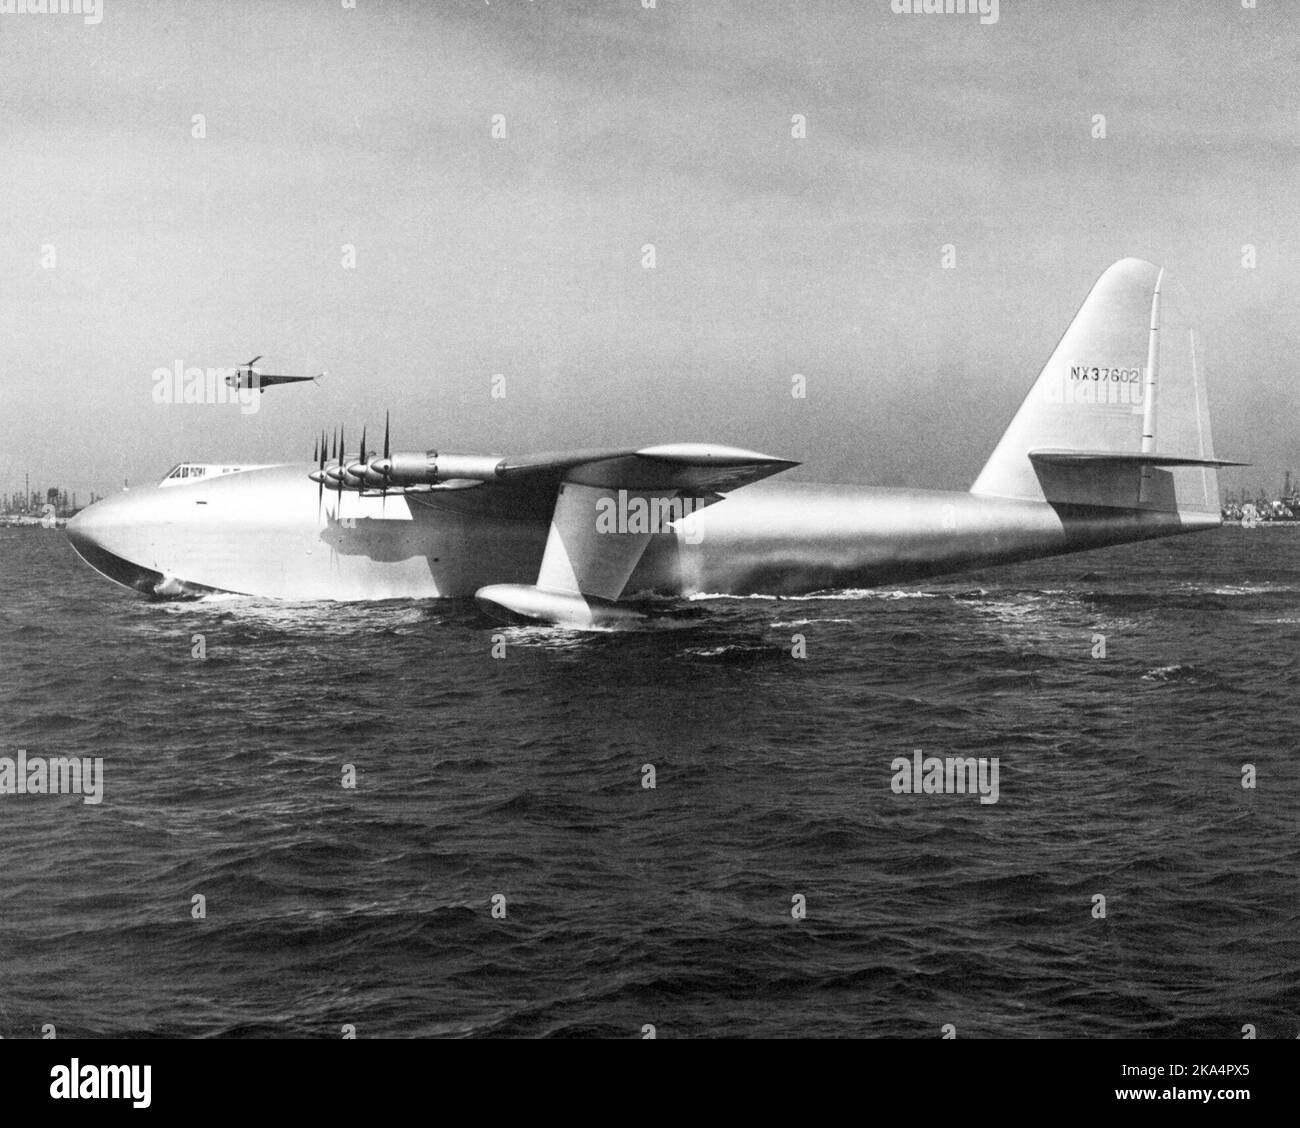 The Spruce Goose aircraft, H-4 Hercules 'Spruce Goose' The Hughes H-4 Hercules (known as the Spruce Goose; registration NX37602) prototype strategic airlift flying boat designed and built by the Hughes Aircraft Company. Stock Photo